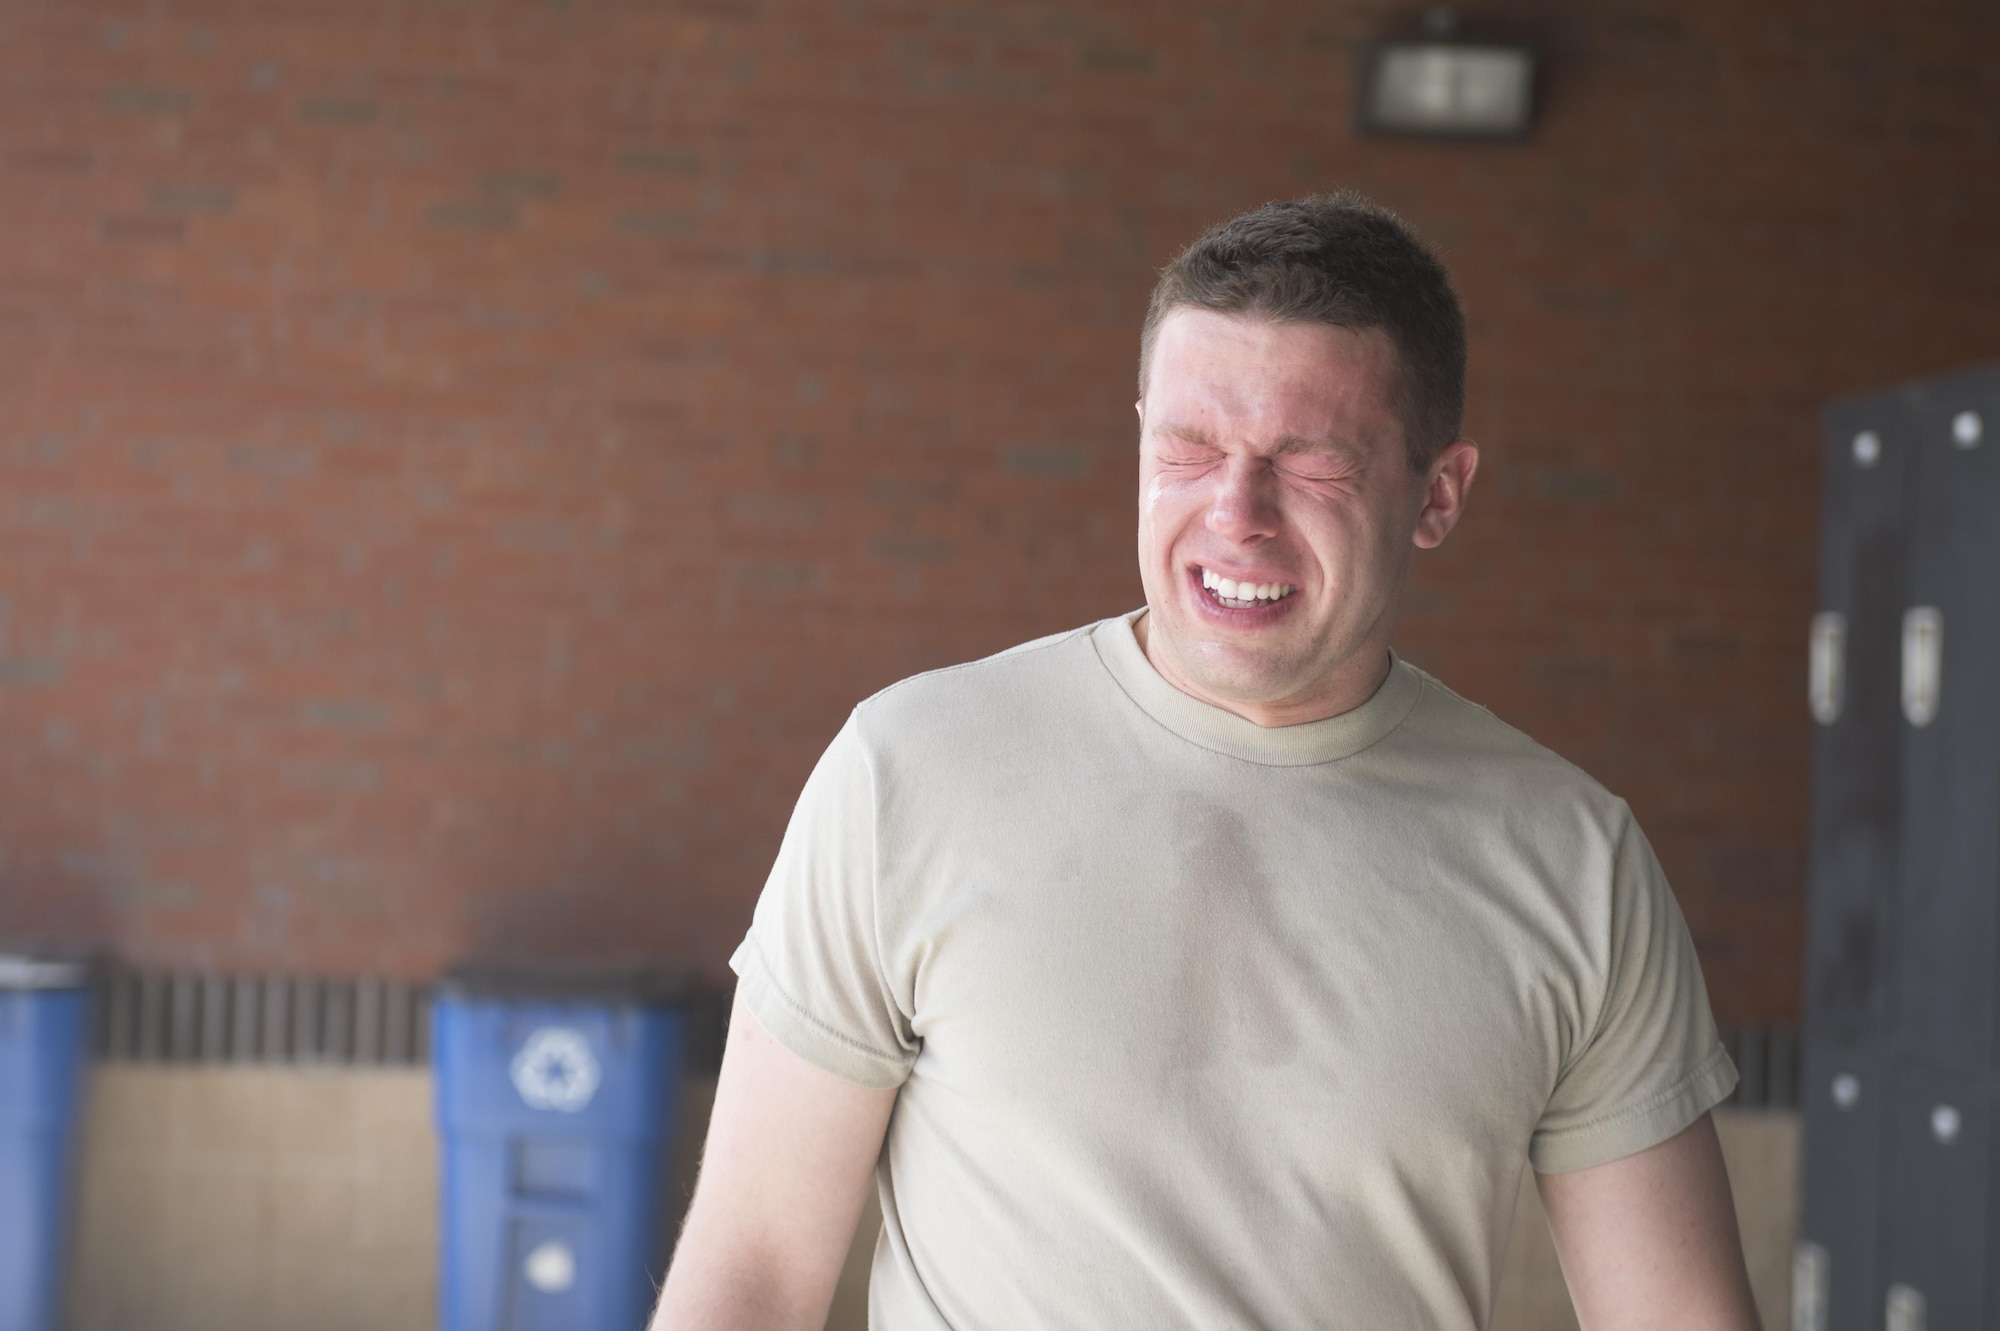 U.S. Air Force Airman Daniel Snider, 23d Wing Public Affairs photojournalist, paces after getting sprayed with oleoresin capsicum spray, March 11, 2016, at Moody Air Force Base, Ga. After being shocked with a Taser, Snider volunteered to be sprayed with OC spray, the law enforcement equivalent to pepper spray. (U.S. Air Force photo by Staff Sgt. Olivia Dominique/Released)